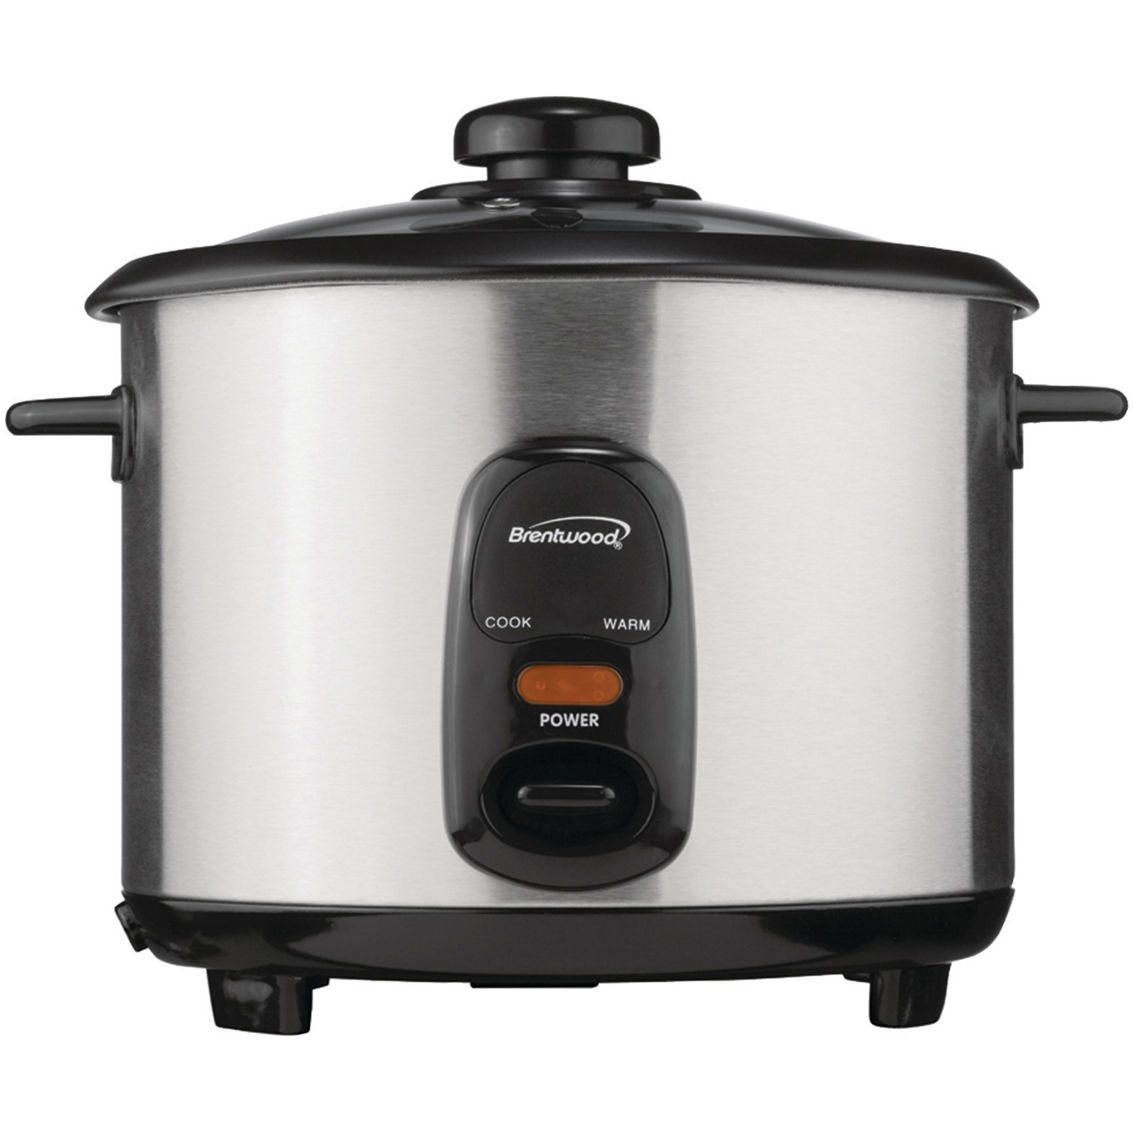 Brentwood Stainless Steel 5 Cup Rice Cooker - Image 2 of 7